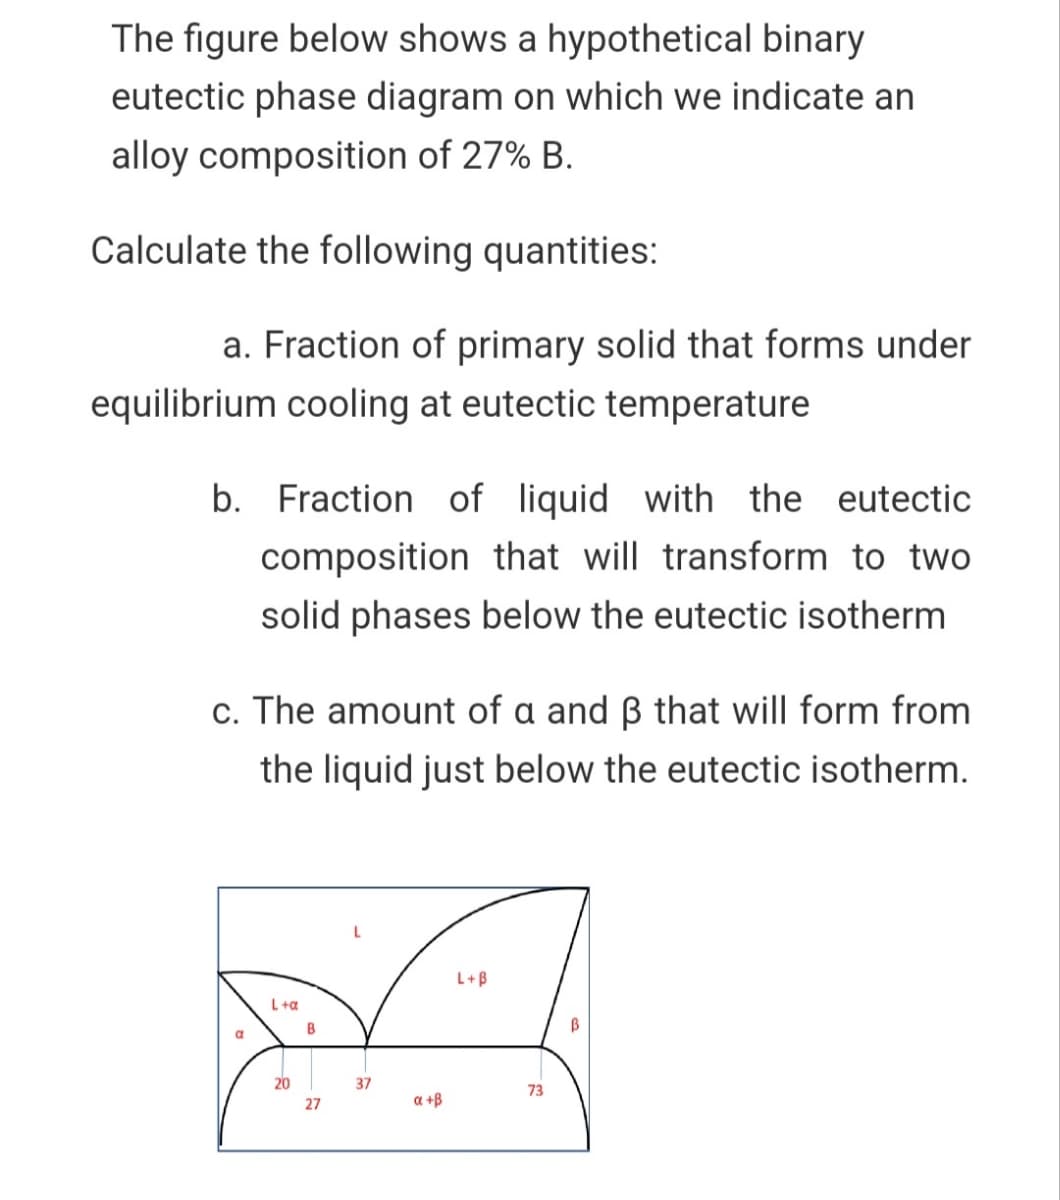 The figure below shows a hypothetical binary
eutectic phase diagram on which we indicate an
alloy composition of 27% B.
Calculate the following quantities:
a. Fraction of primary solid that forms under
equilibrium cooling at eutectic temperature
b. Fraction of liquid with the eutectic
composition that will transform to two
solid phases below the eutectic isotherm
c. The amount of a and ß that will form from
the liquid just below the eutectic isotherm.
L+B
L+a
B
20
37
73
27
a +B
